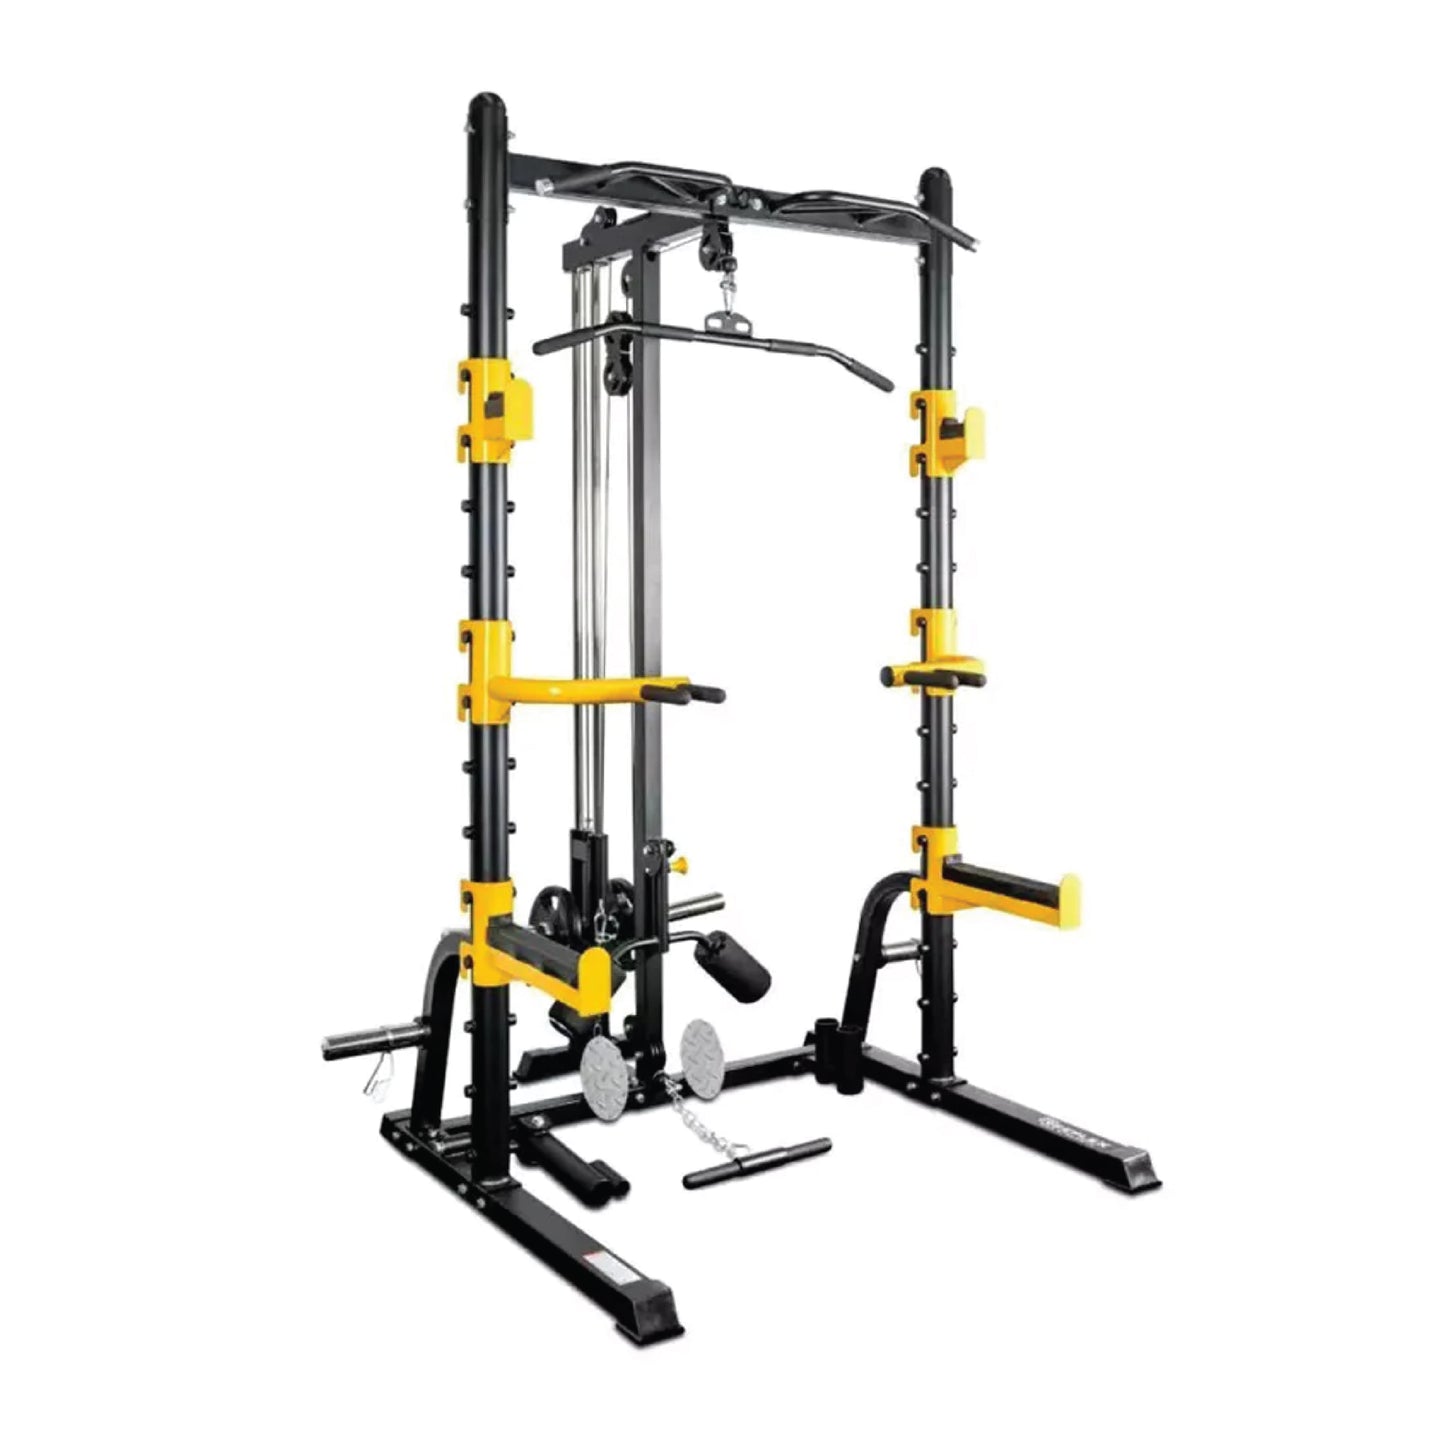 Combo Offer Squat Rack MDL66 + 7 ft Bar and 80 Kg Weight Plate Set with Adjustable Bench A8007